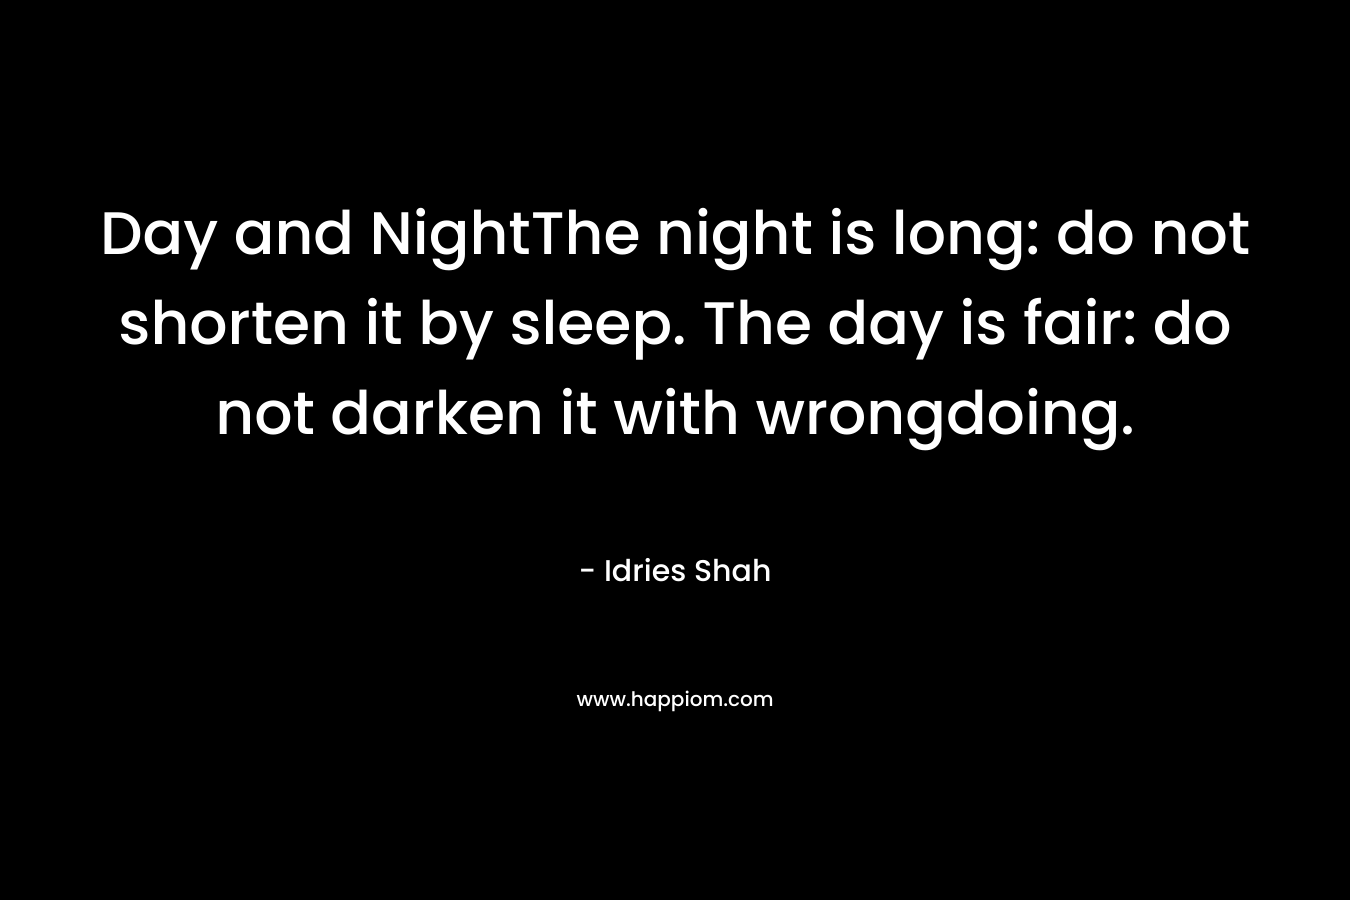 Day and NightThe night is long: do not shorten it by sleep. The day is fair: do not darken it with wrongdoing. – Idries Shah